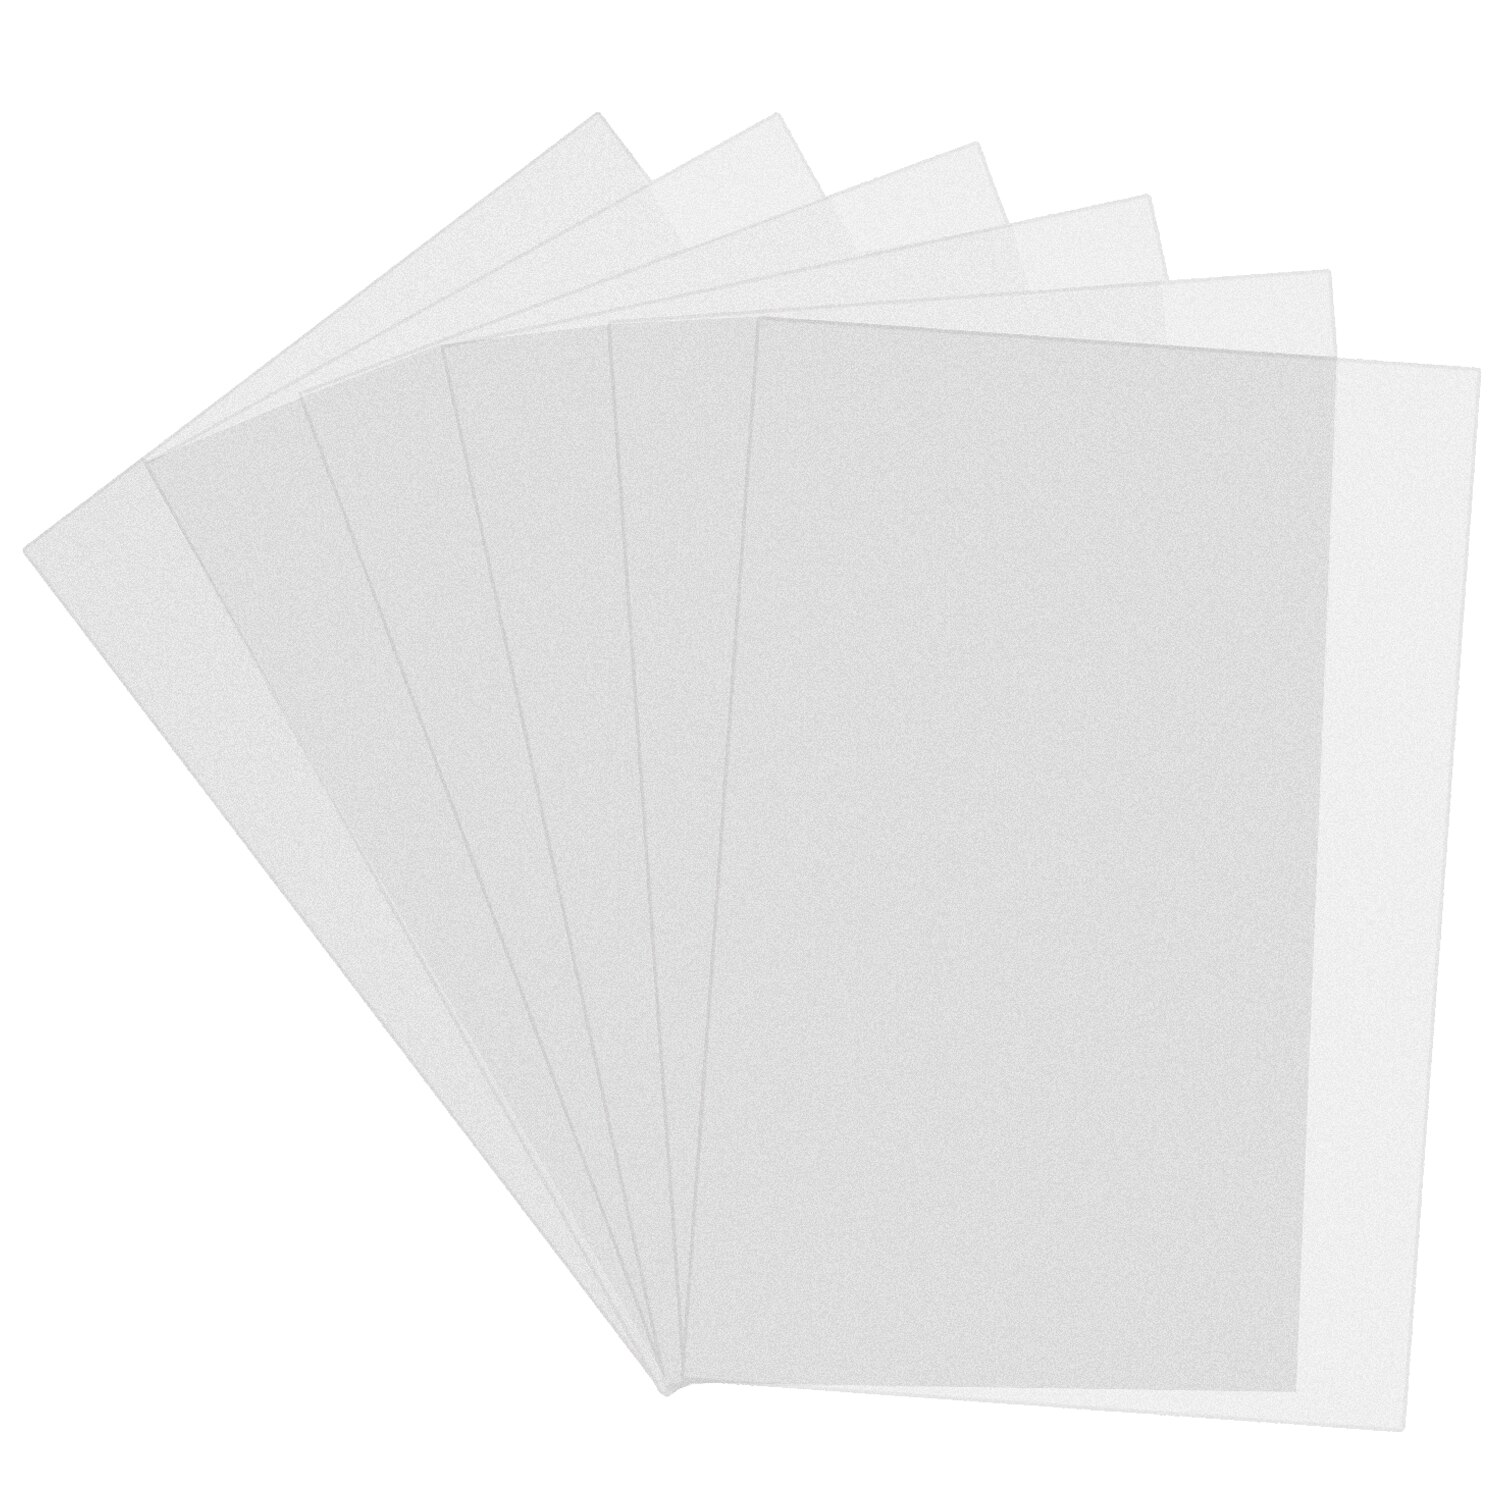 50 Sheets A4 Size Translucent Sketching Tracing Paper for Manga Art Architecture Graphic Ttechnical Drawing